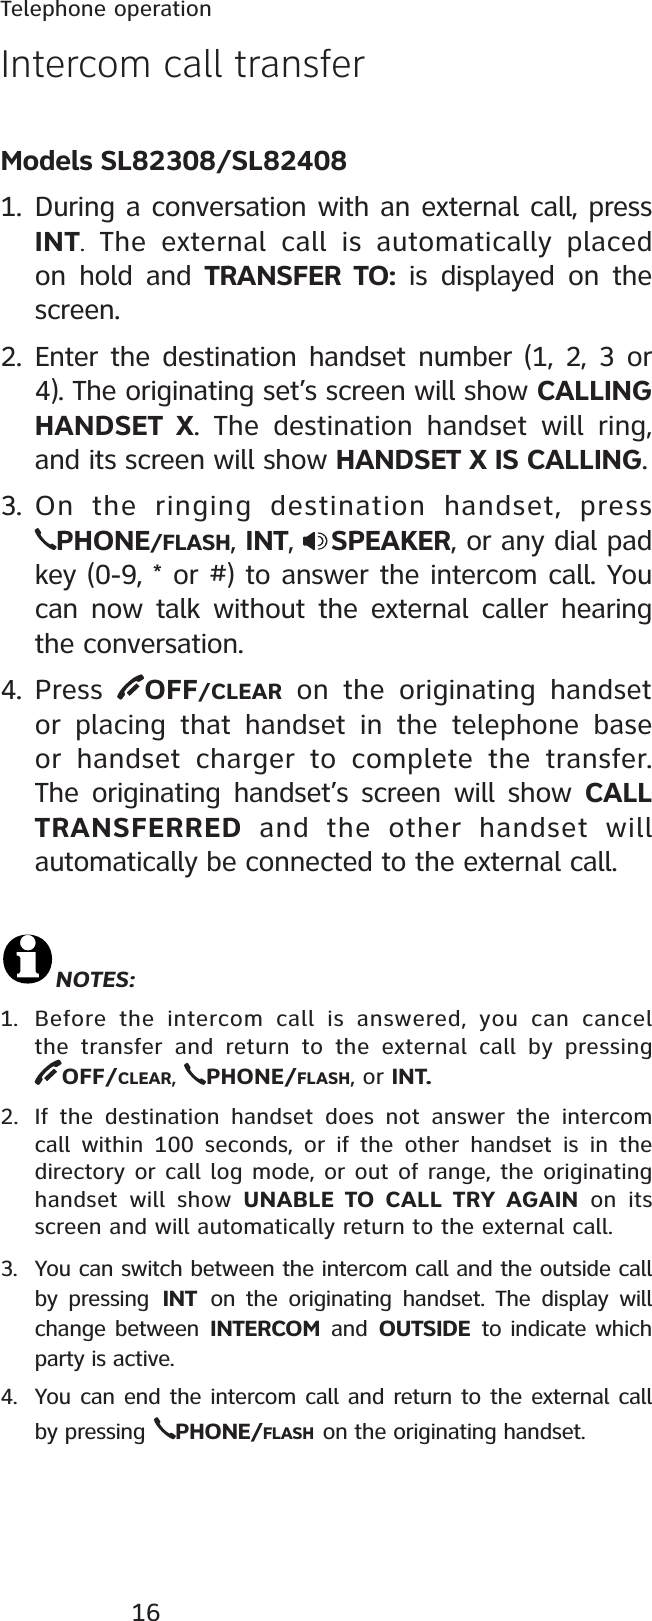 16Telephone operationIntercom call transfer  Models SL82308/SL824081. During a conversation with an external call, press INT. The external call is automatically placed on hold and TRANSFER TO: is displayed on the screen.2. Enter the destination handset number (1, 2, 3 or 4). The originating set’s screen will show CALLING HANDSET X. The destination handset will ring, and its screen will show HANDSET X IS CALLING.3. On the ringing destination handset, press PHONE/FLASH, INT,  SPEAKER, or any dial pad key (0-9, * or #) to answer the intercom call. You can now talk without the external caller hearing the conversation.4. Press  OFF/CLEAR on the originating handset or placing that handset in the telephone base or handset charger to complete the transfer. The originating handset’s screen will show CALL TRANSFERRED and the other handset will automatically be connected to the external call.NOTES:1. Before the intercom call is answered, you can cancel the transfer and return to the external call by pressing          OFF/CLEAR,PHONE/FLASH, or INT.2. If the destination handset does not answer the intercom call within 100 seconds, or if the other handset is in the directory or call log mode, or out of range, the originating handset will show UNABLE TO CALL TRY AGAIN on its screen and will automatically return to the external call.3. You can switch between the intercom call and the outside call by pressing INT on the originating handset. The display will change between INTERCOM and OUTSIDE to indicate which party is active.4. You can end the intercom call and return to the external call by pressing PHONE/FLASH on the originating handset.